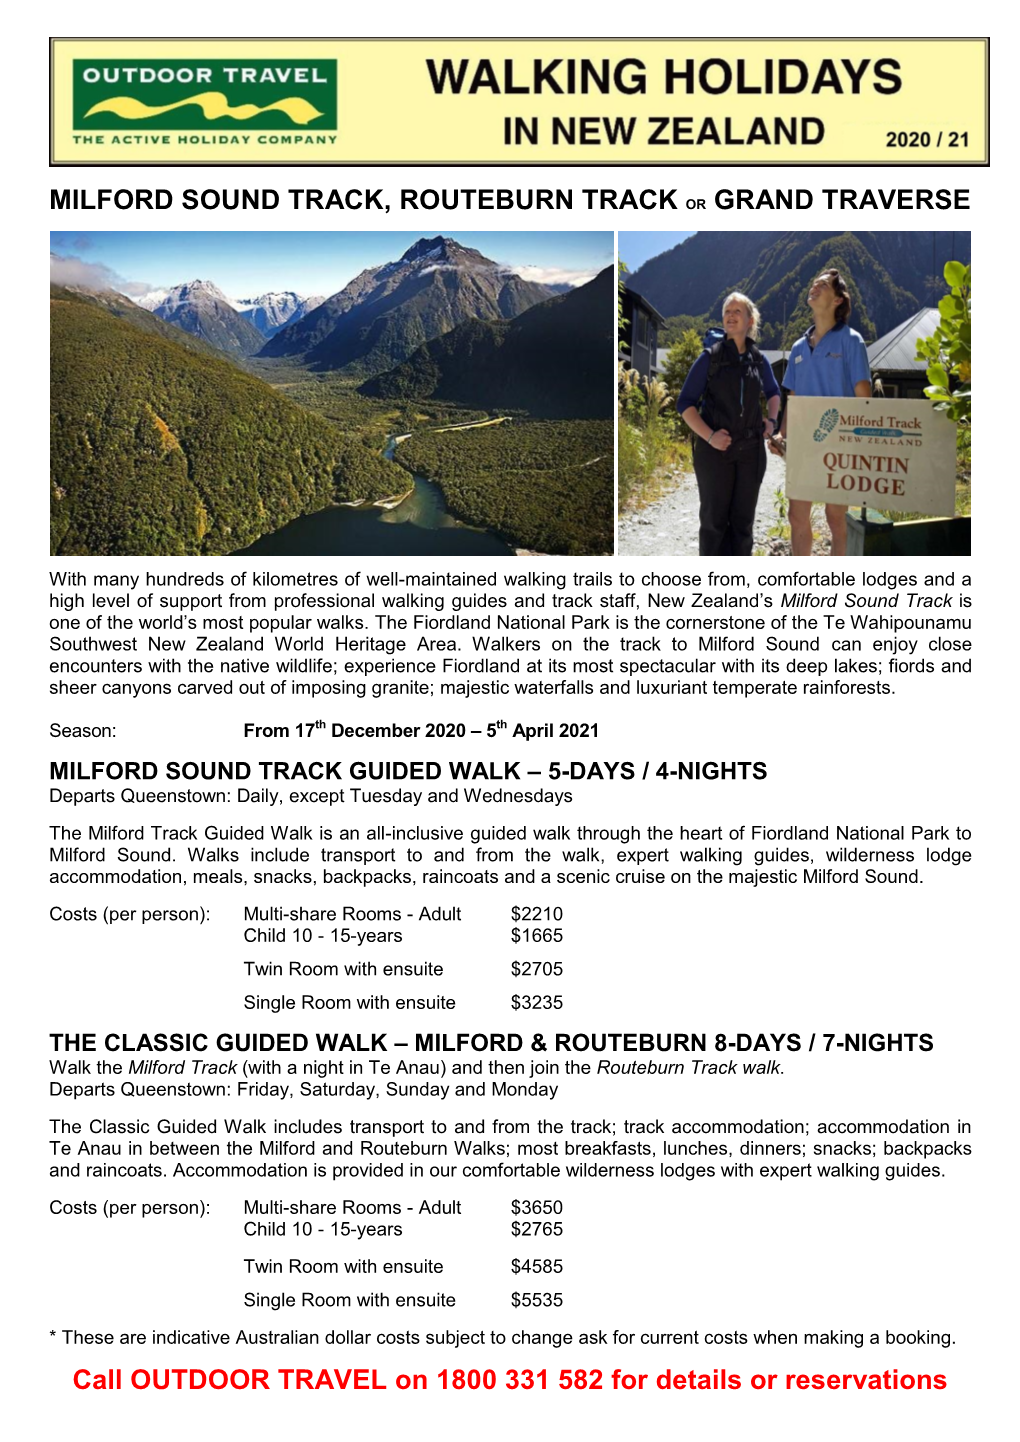 MILFORD TRACK Pricelist GUIDED WALK